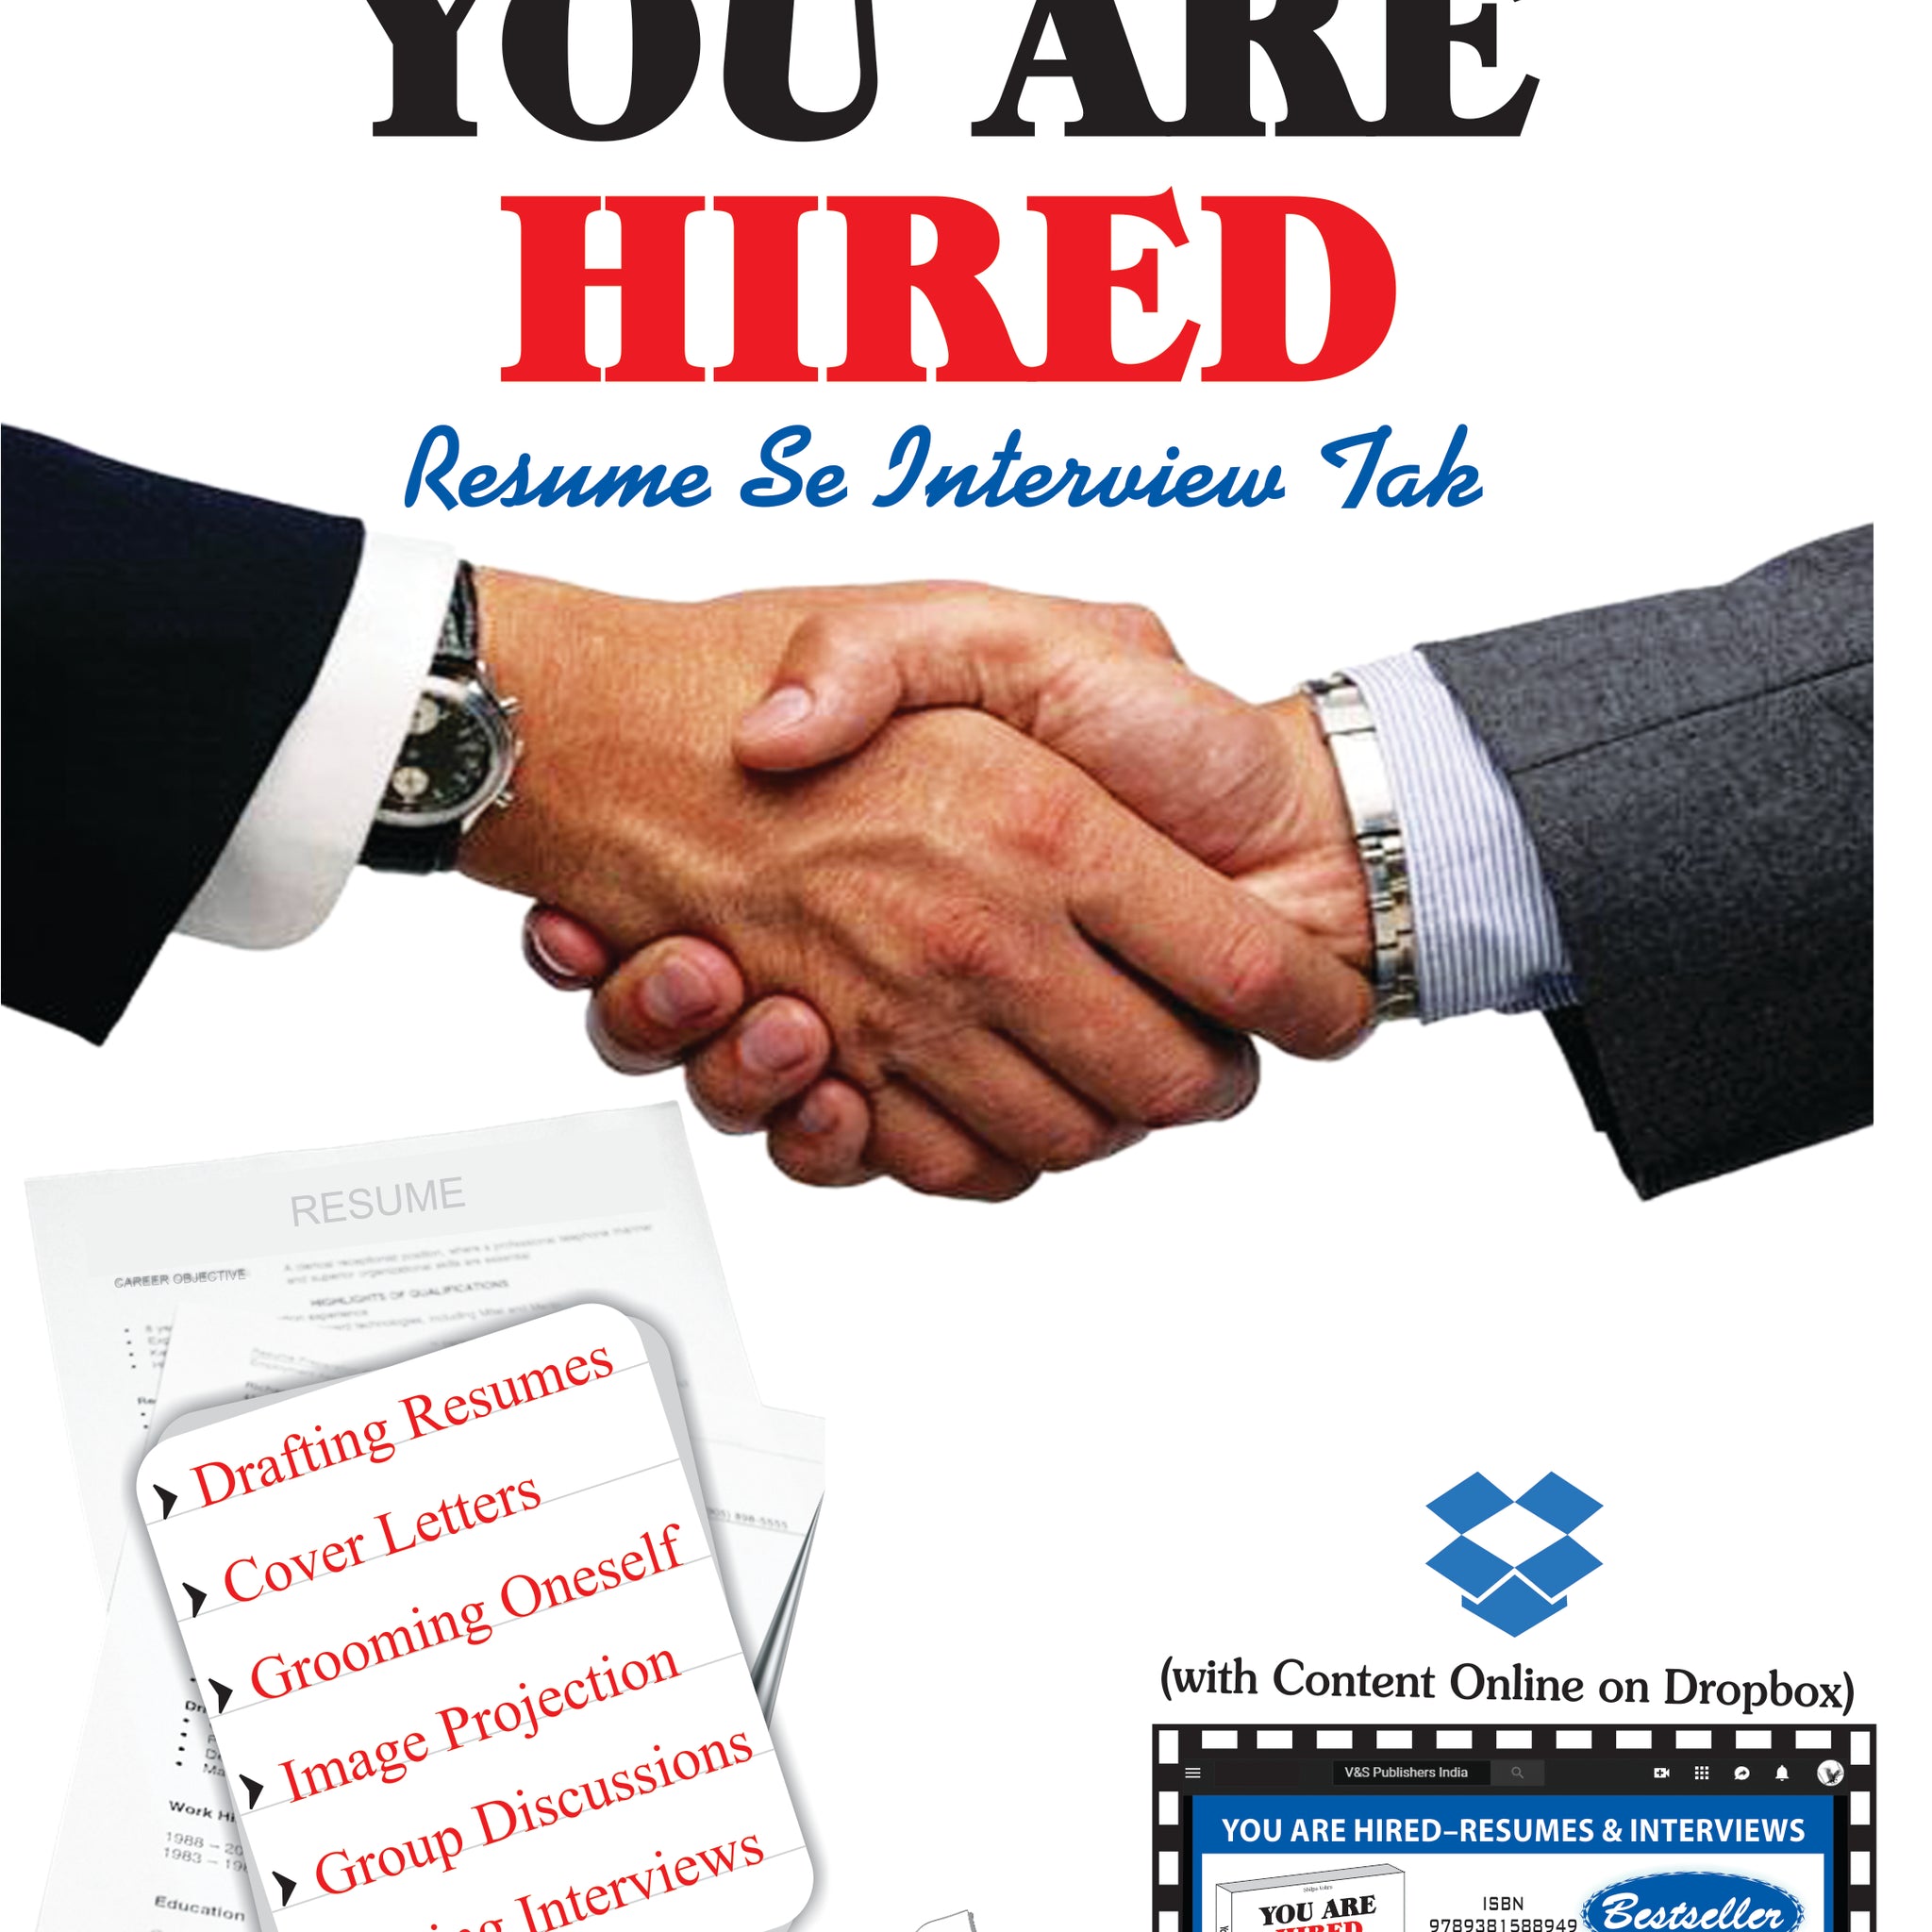 You Are Hired - Resume Se Interview (With Online Content on Dropbox)